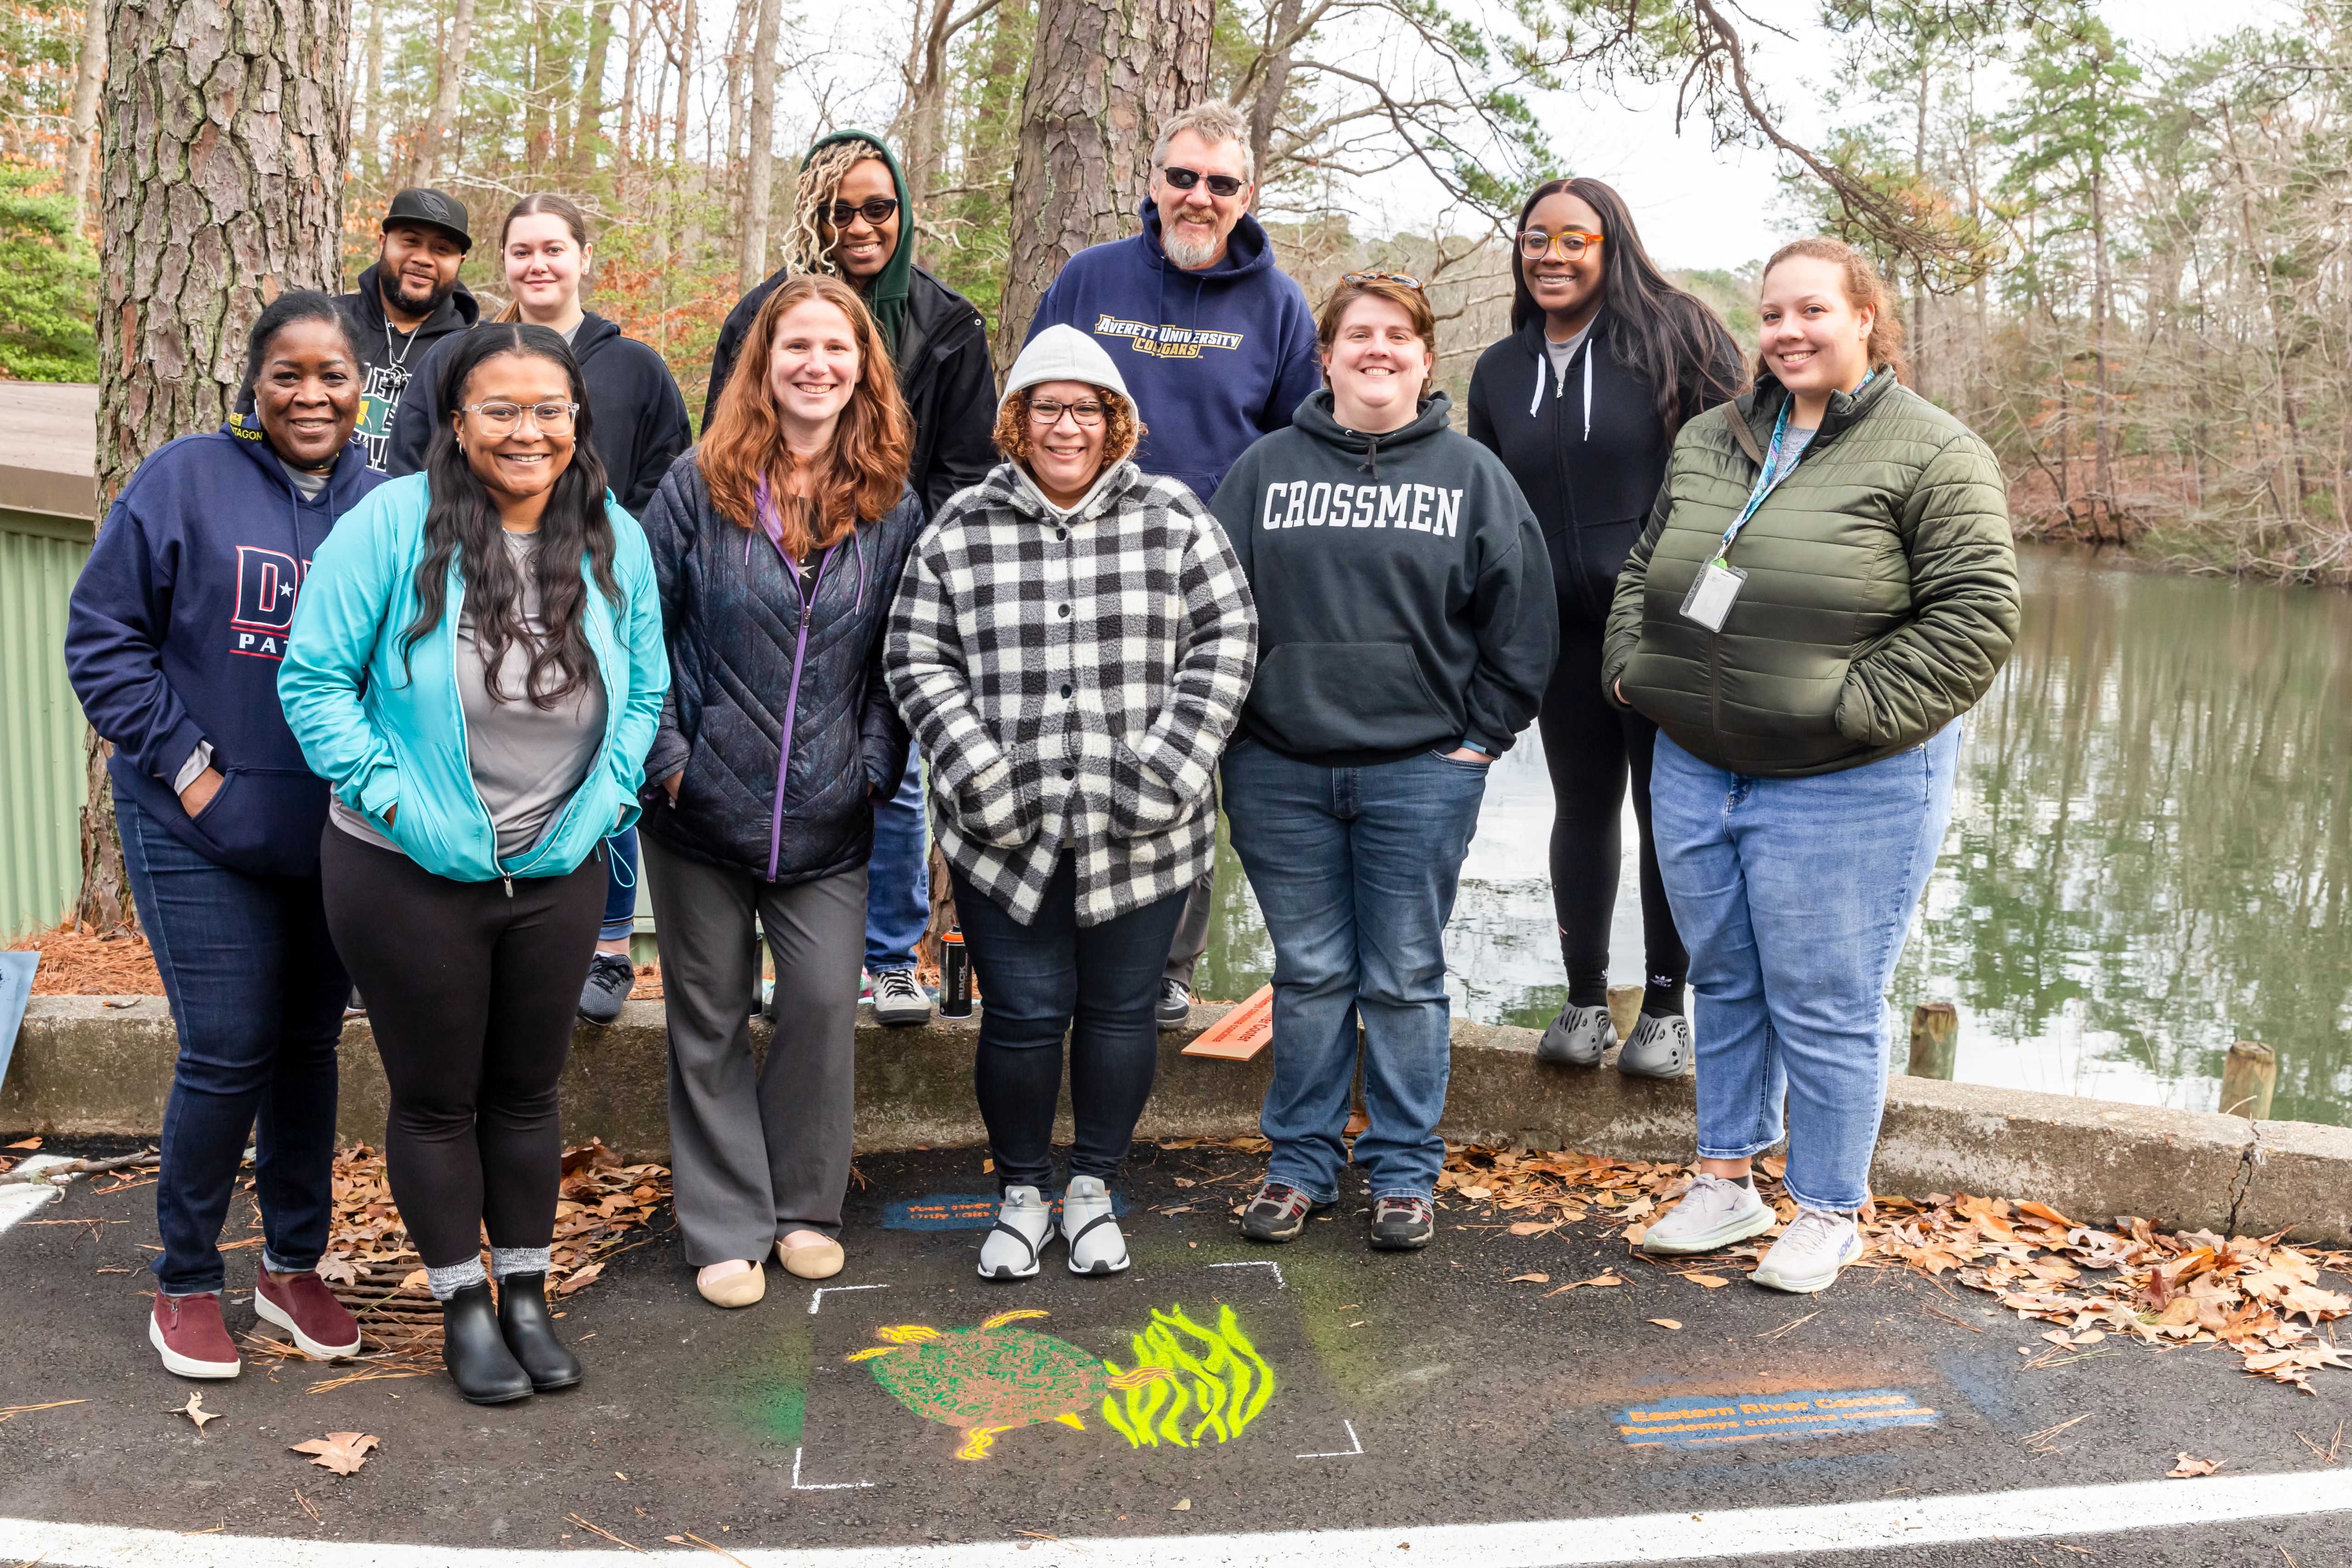 B-WET teachers work alongside The Mariners’ Education team at the Lake boathouse to "paint-out pollution" - a James River Association initiative that brings awareness to watershed health.